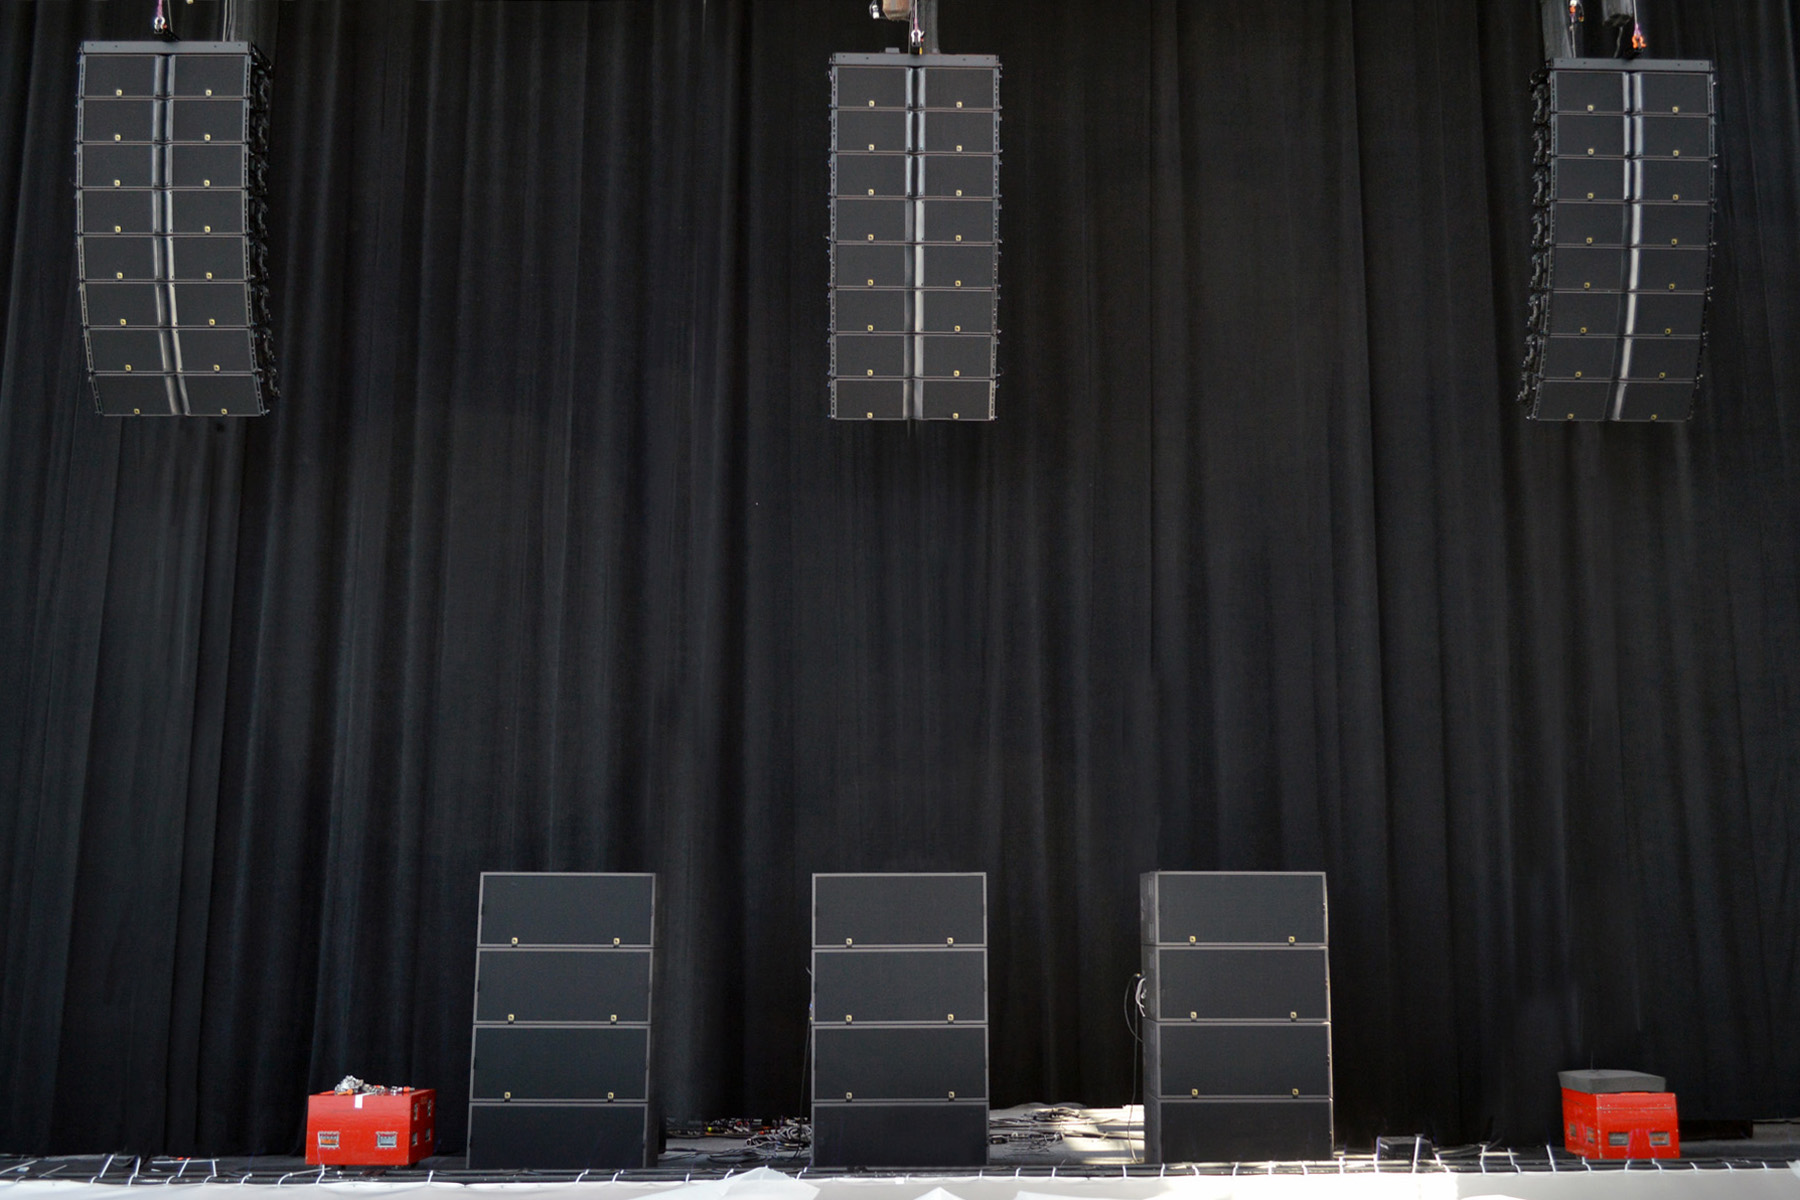 K2 sound system set up by L-Acoustics at the World Premiere of X-Men: Days of Future Past